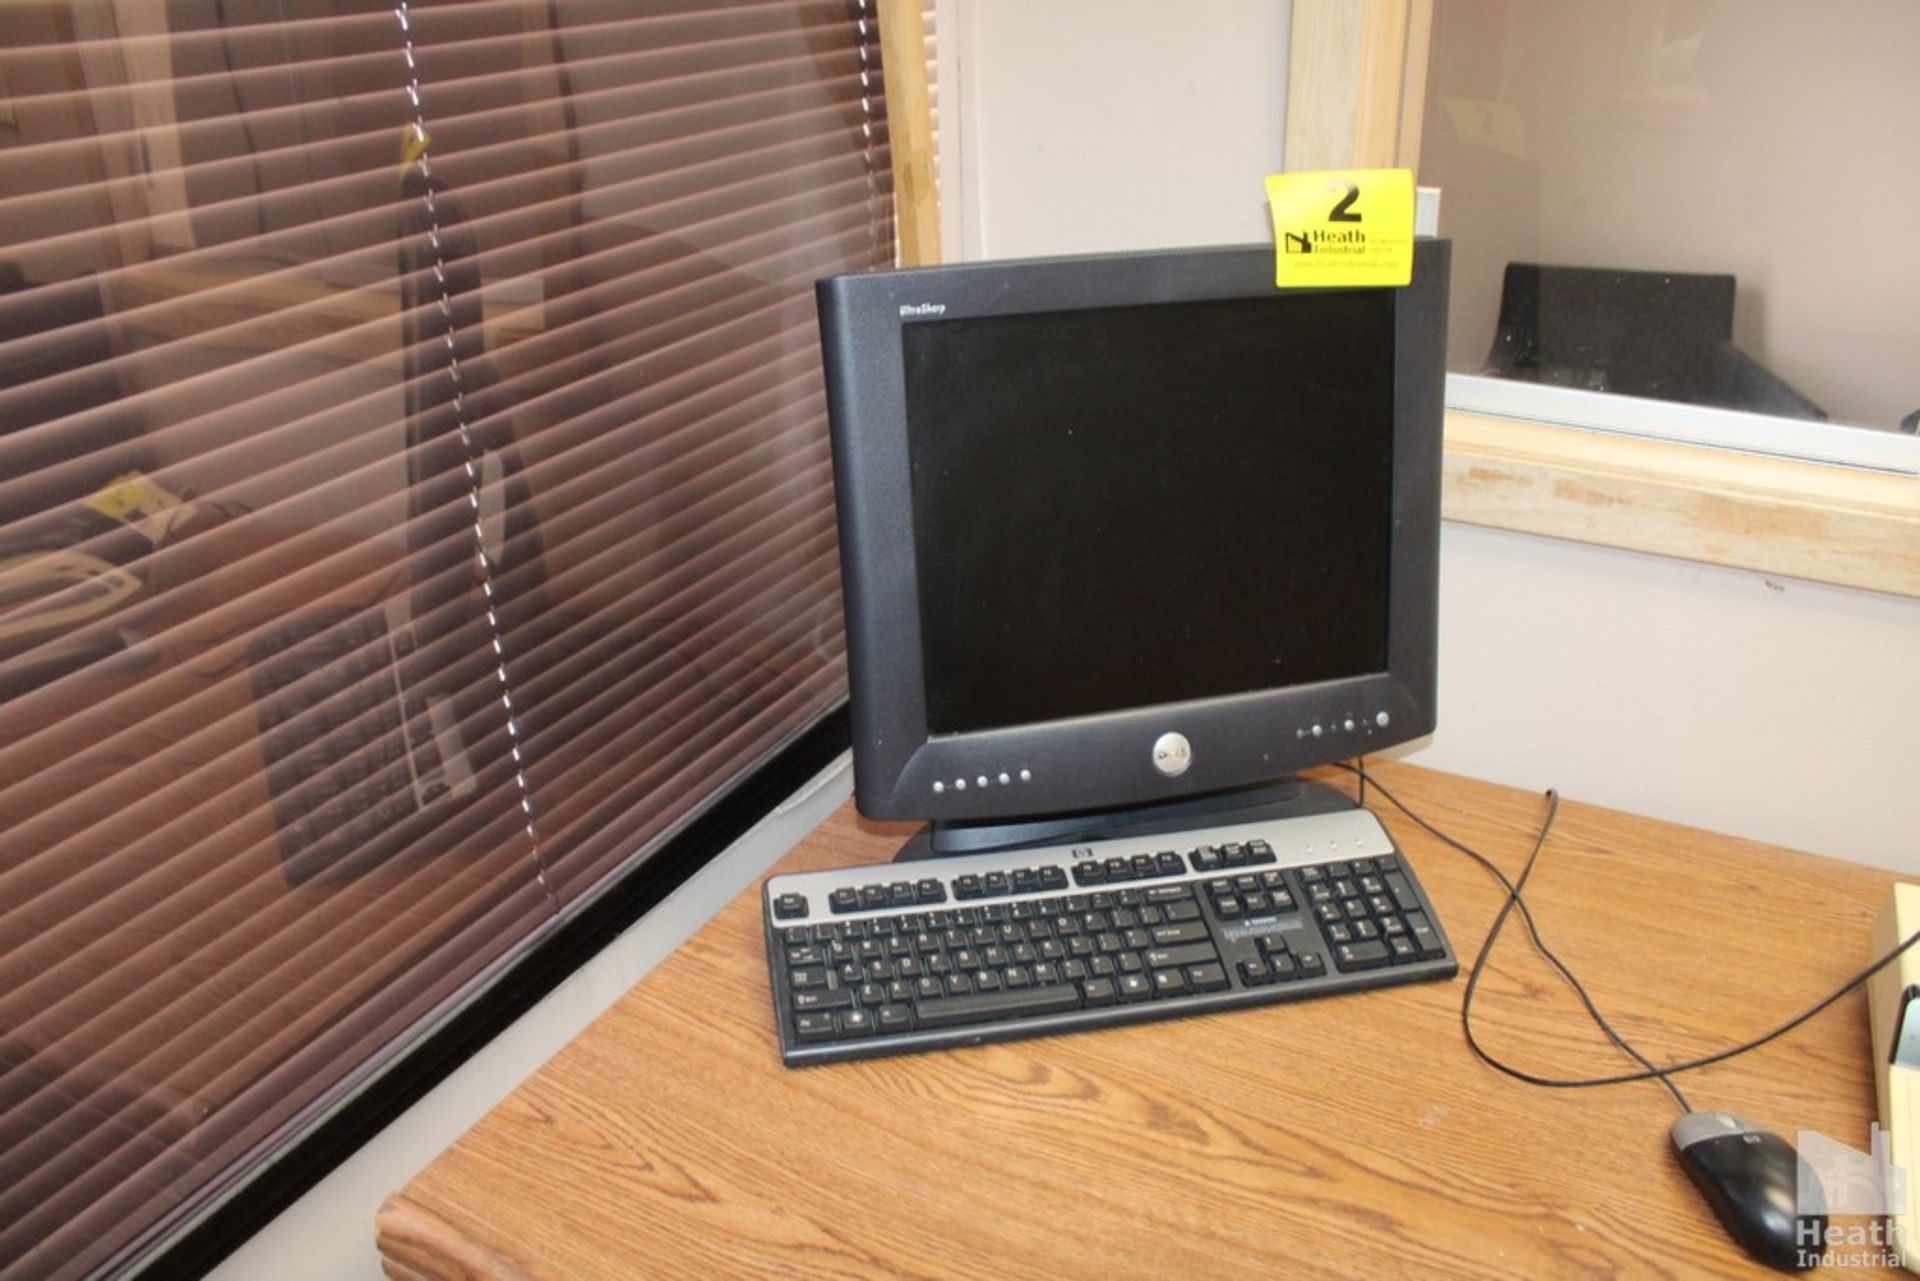 COMPAQ DESKPRO PC WITH MONITOR, KEYBOARD AND MOUSE